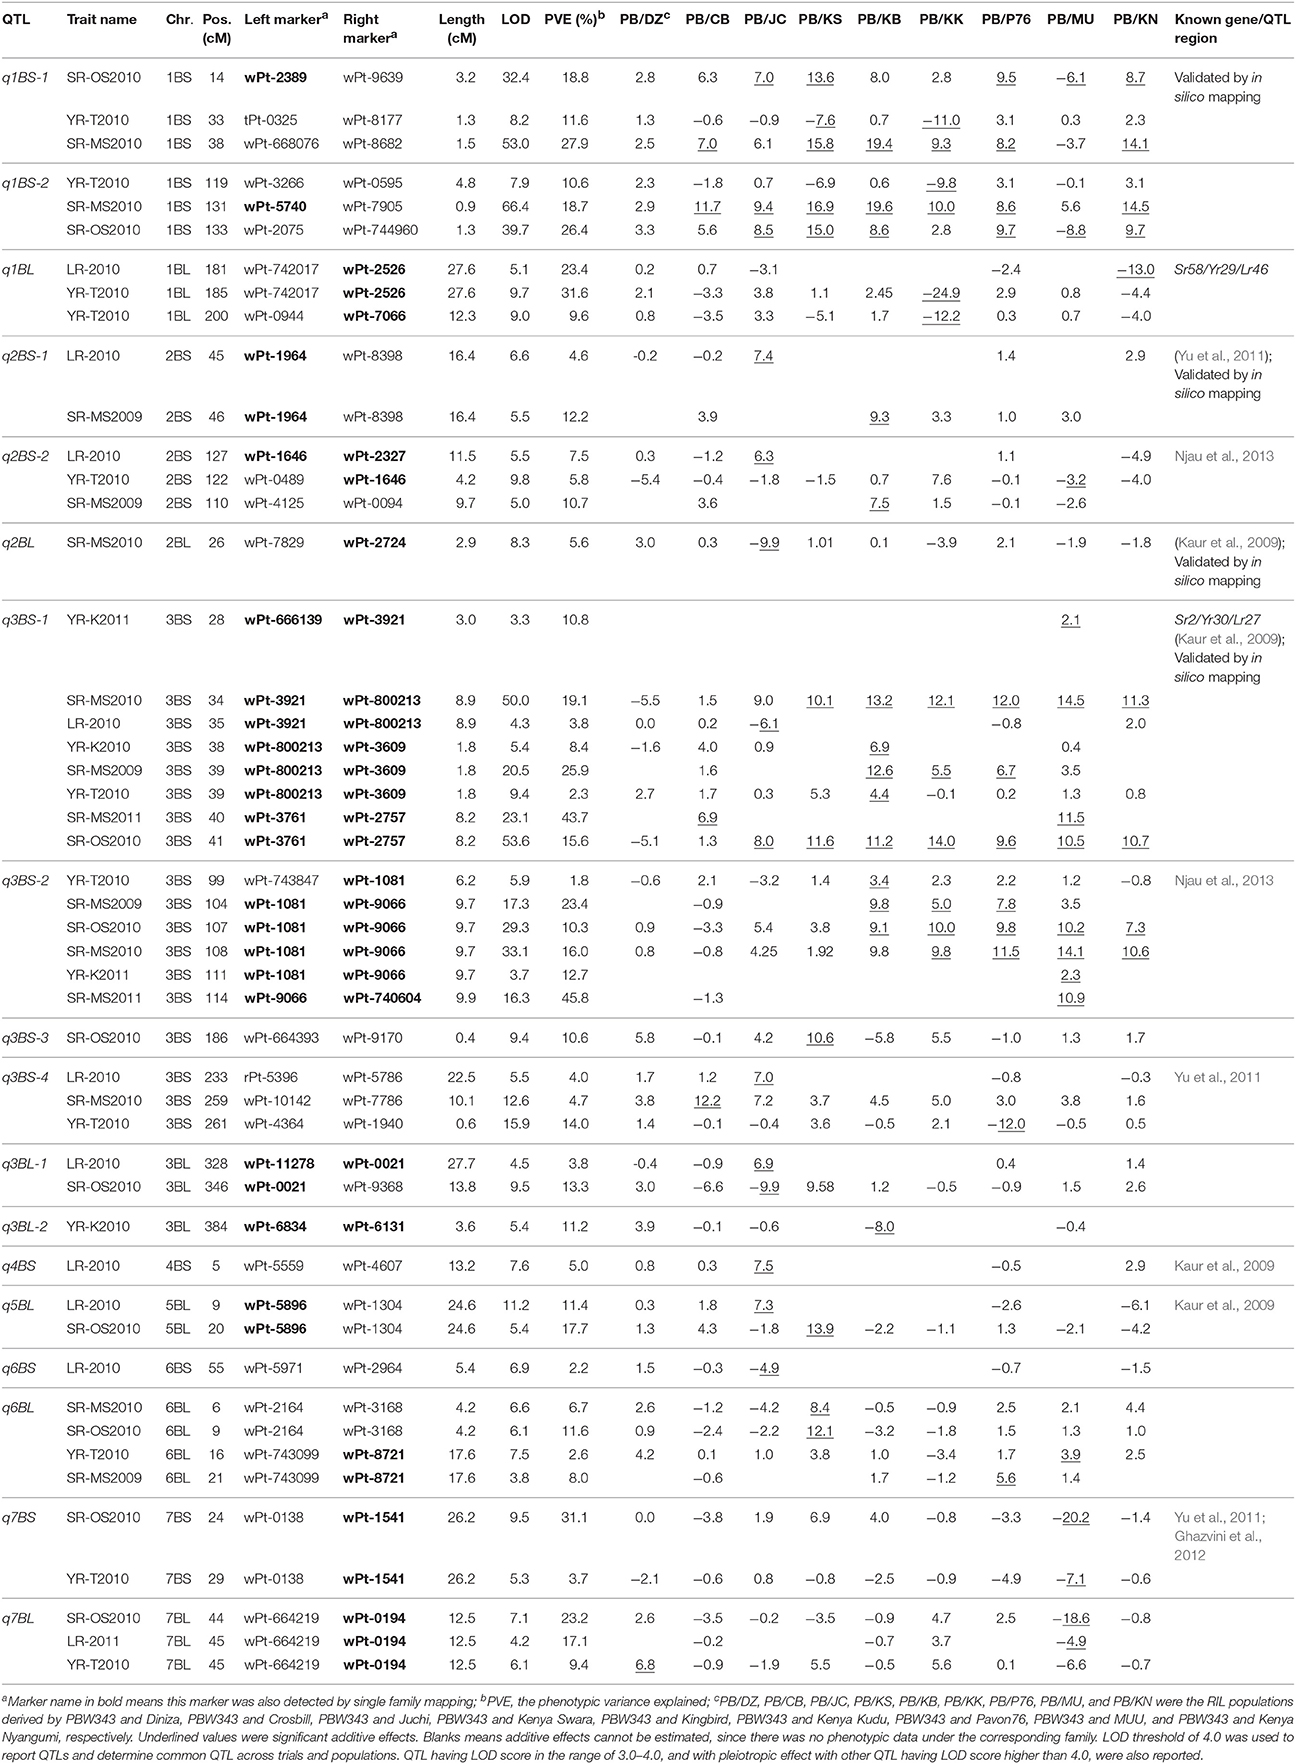 Frontiers | Identification of Genomic Associations for Adult Plant ...